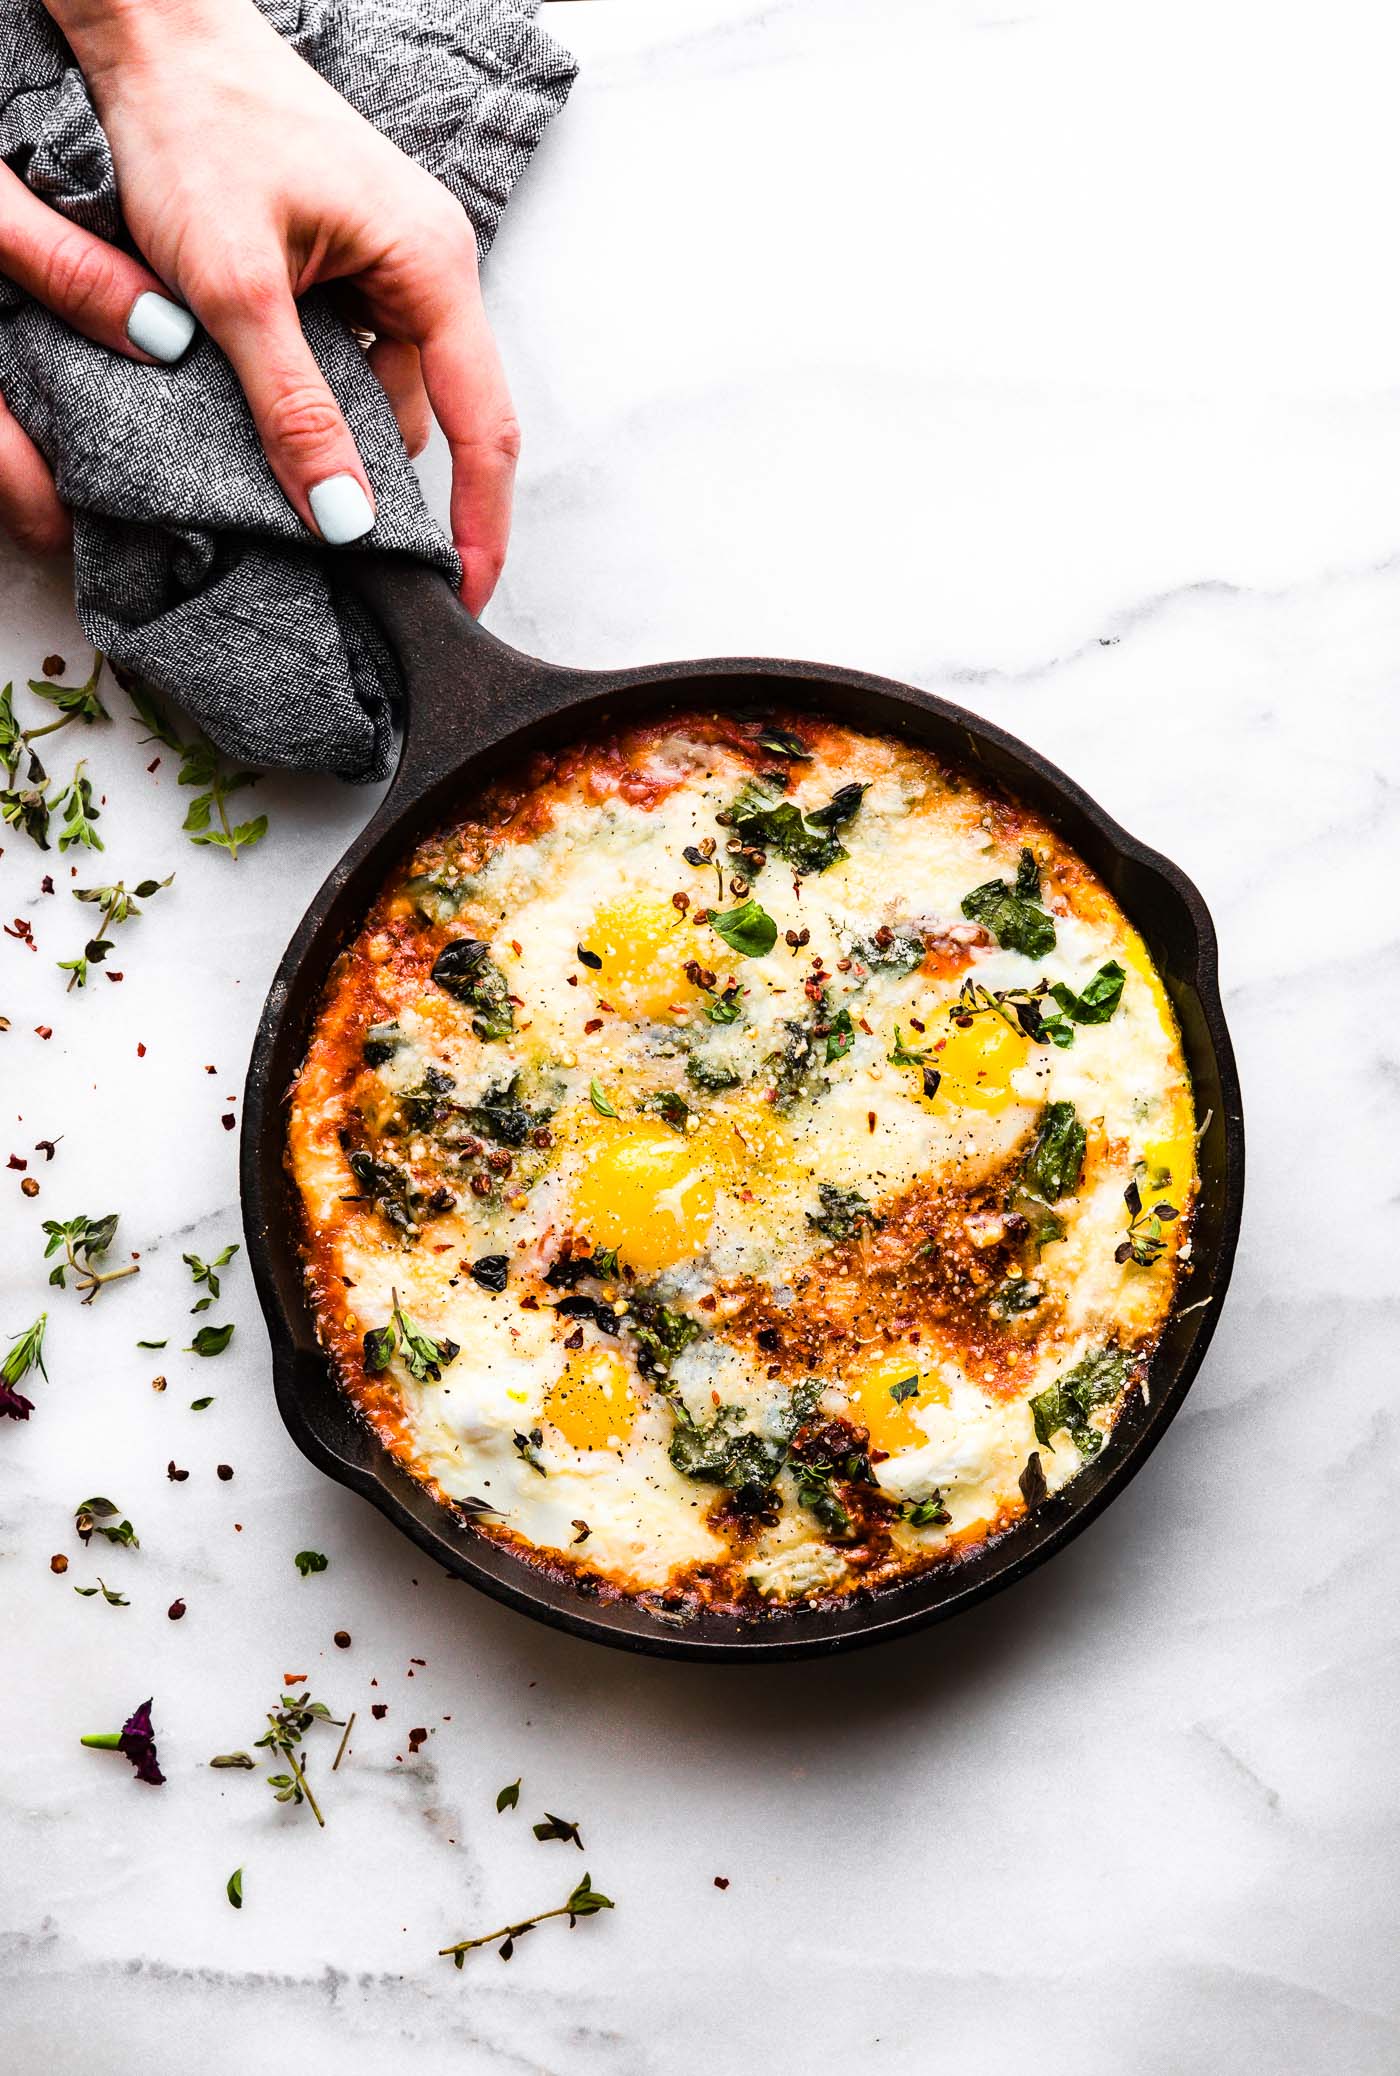 Overhead view small cast iron skillet with baked frittata